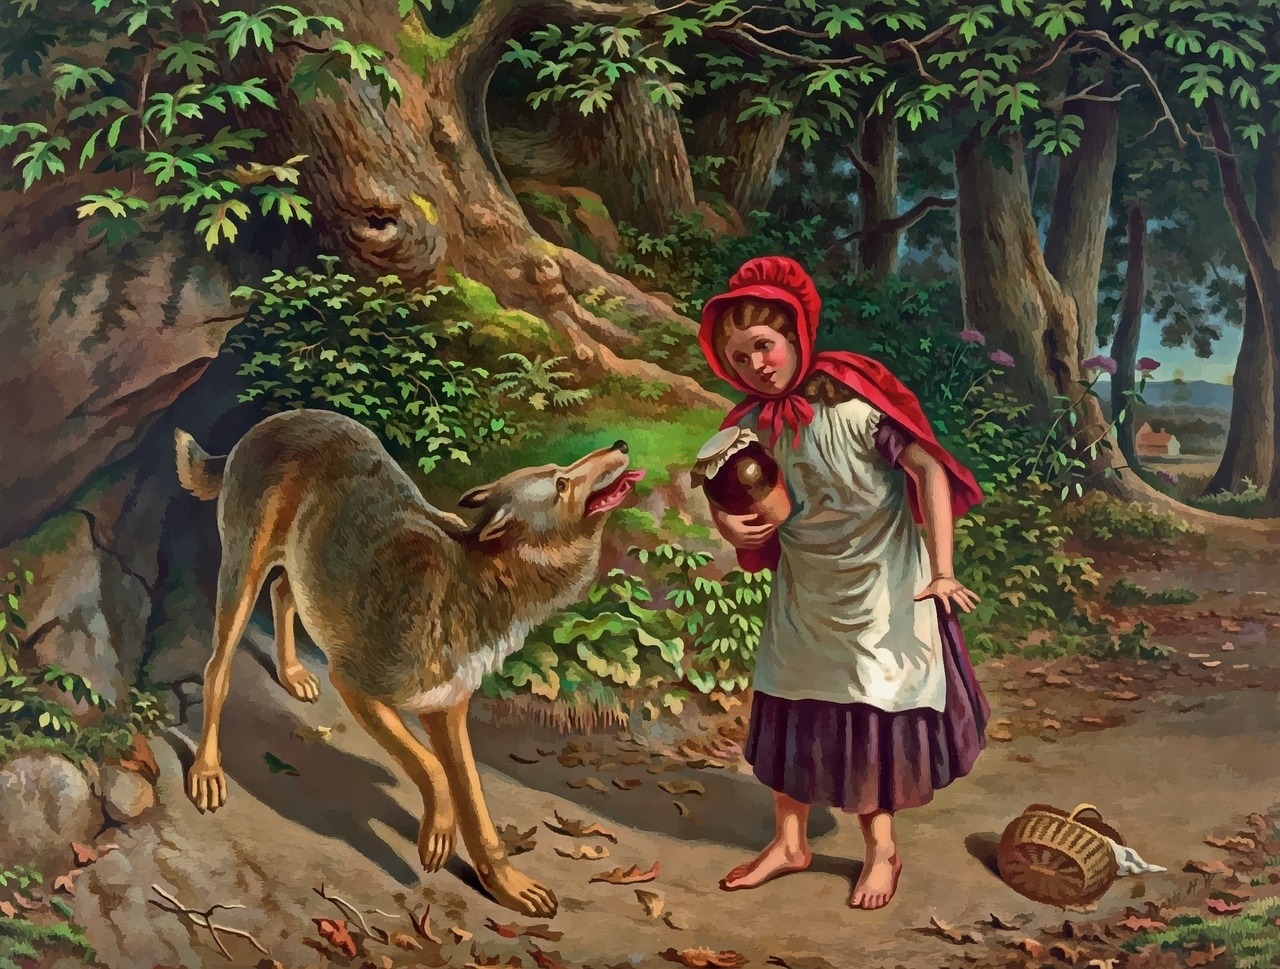 Little Red Riding Hood was brought to North America from the Old World but Red Elk knew different ancient stories about the relationship between people and wolves. 